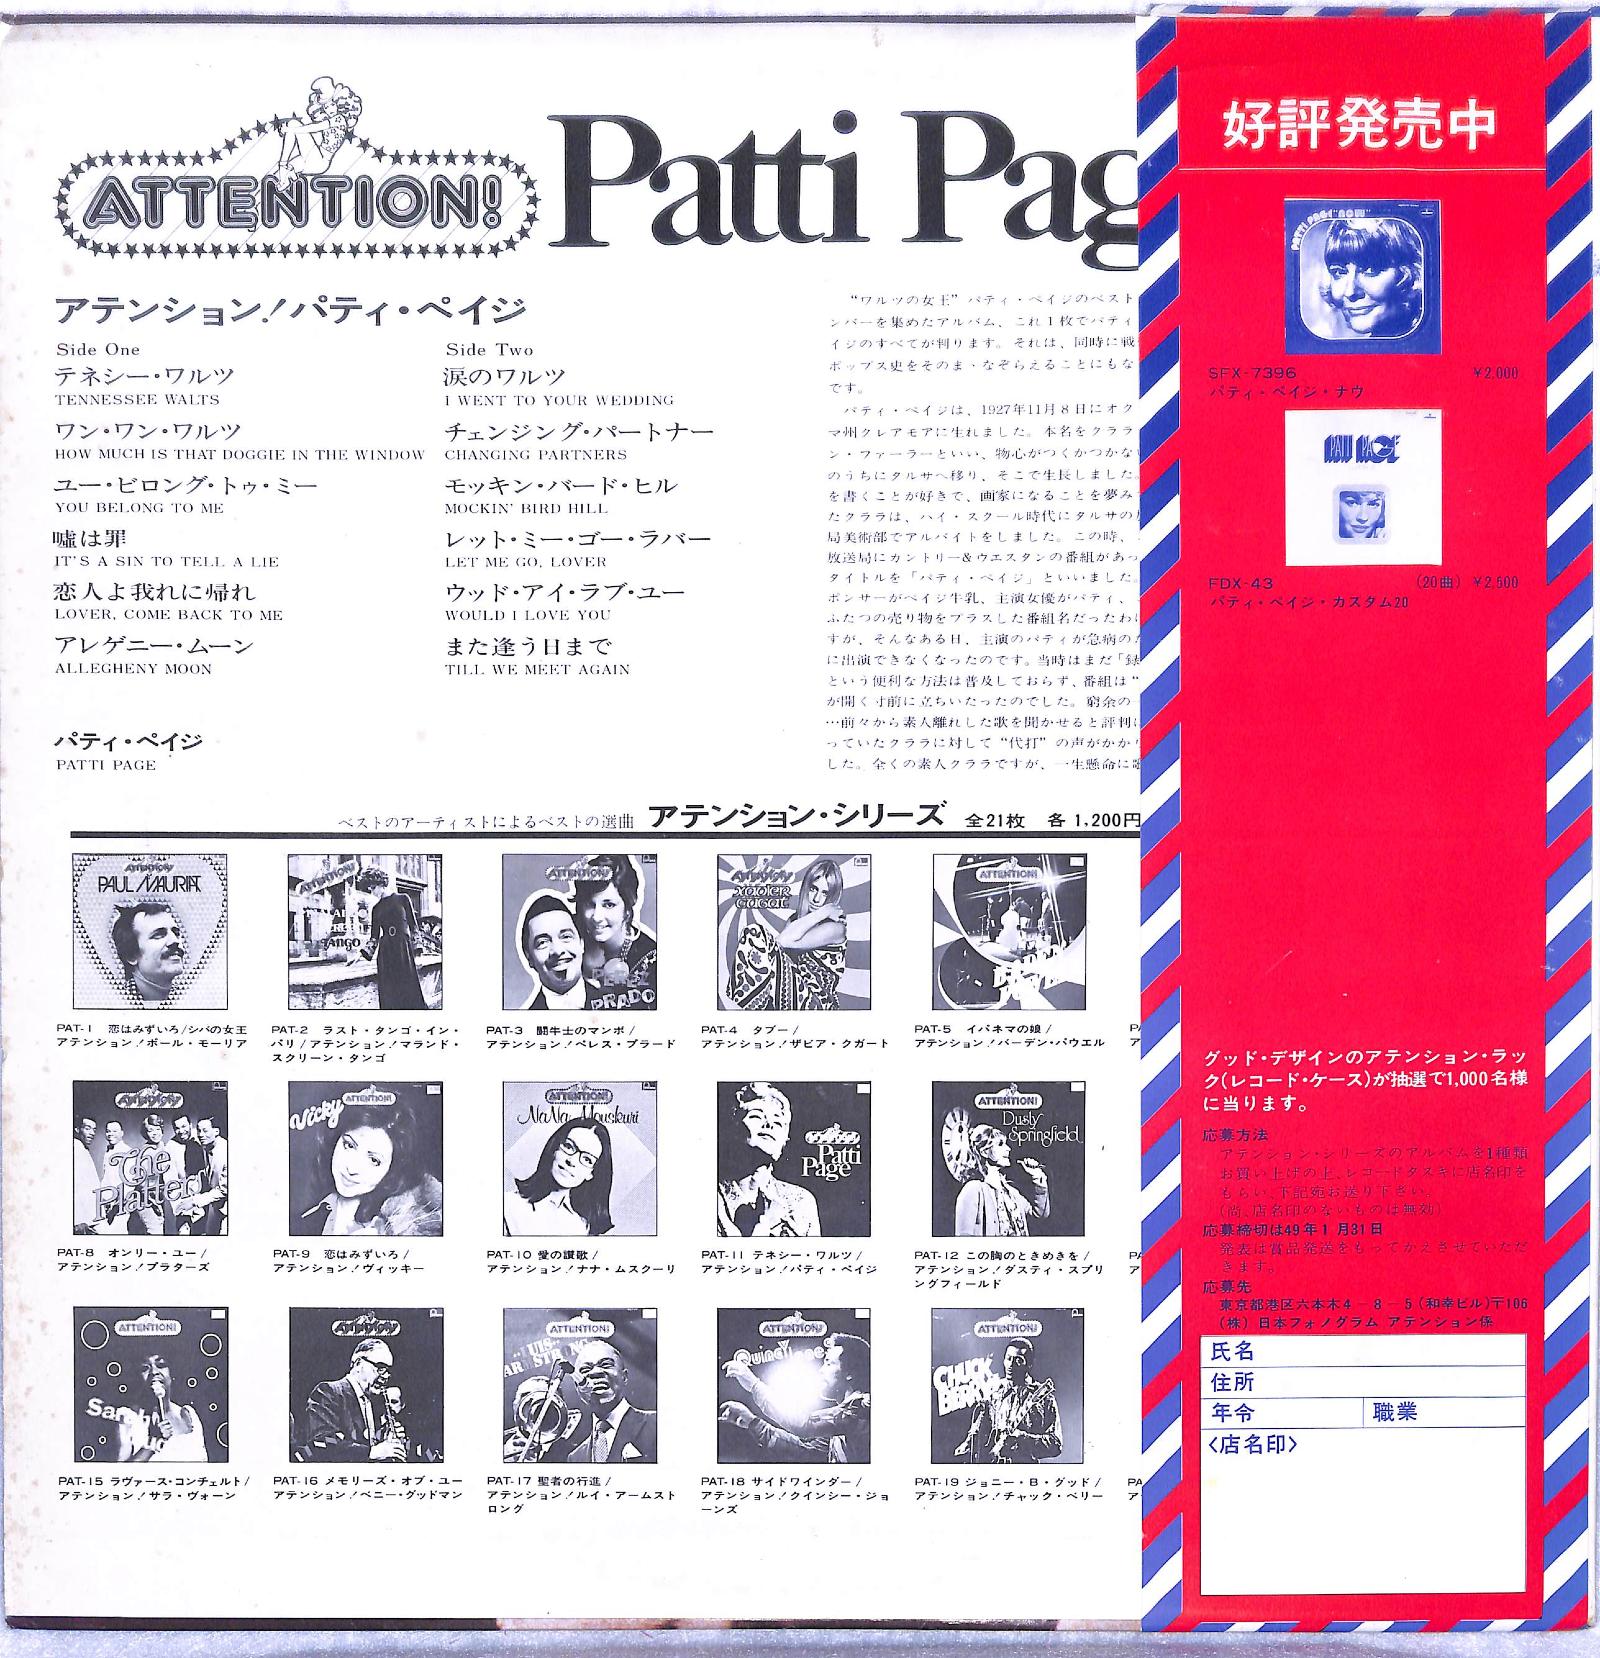 PATTI PAGE - Attention!